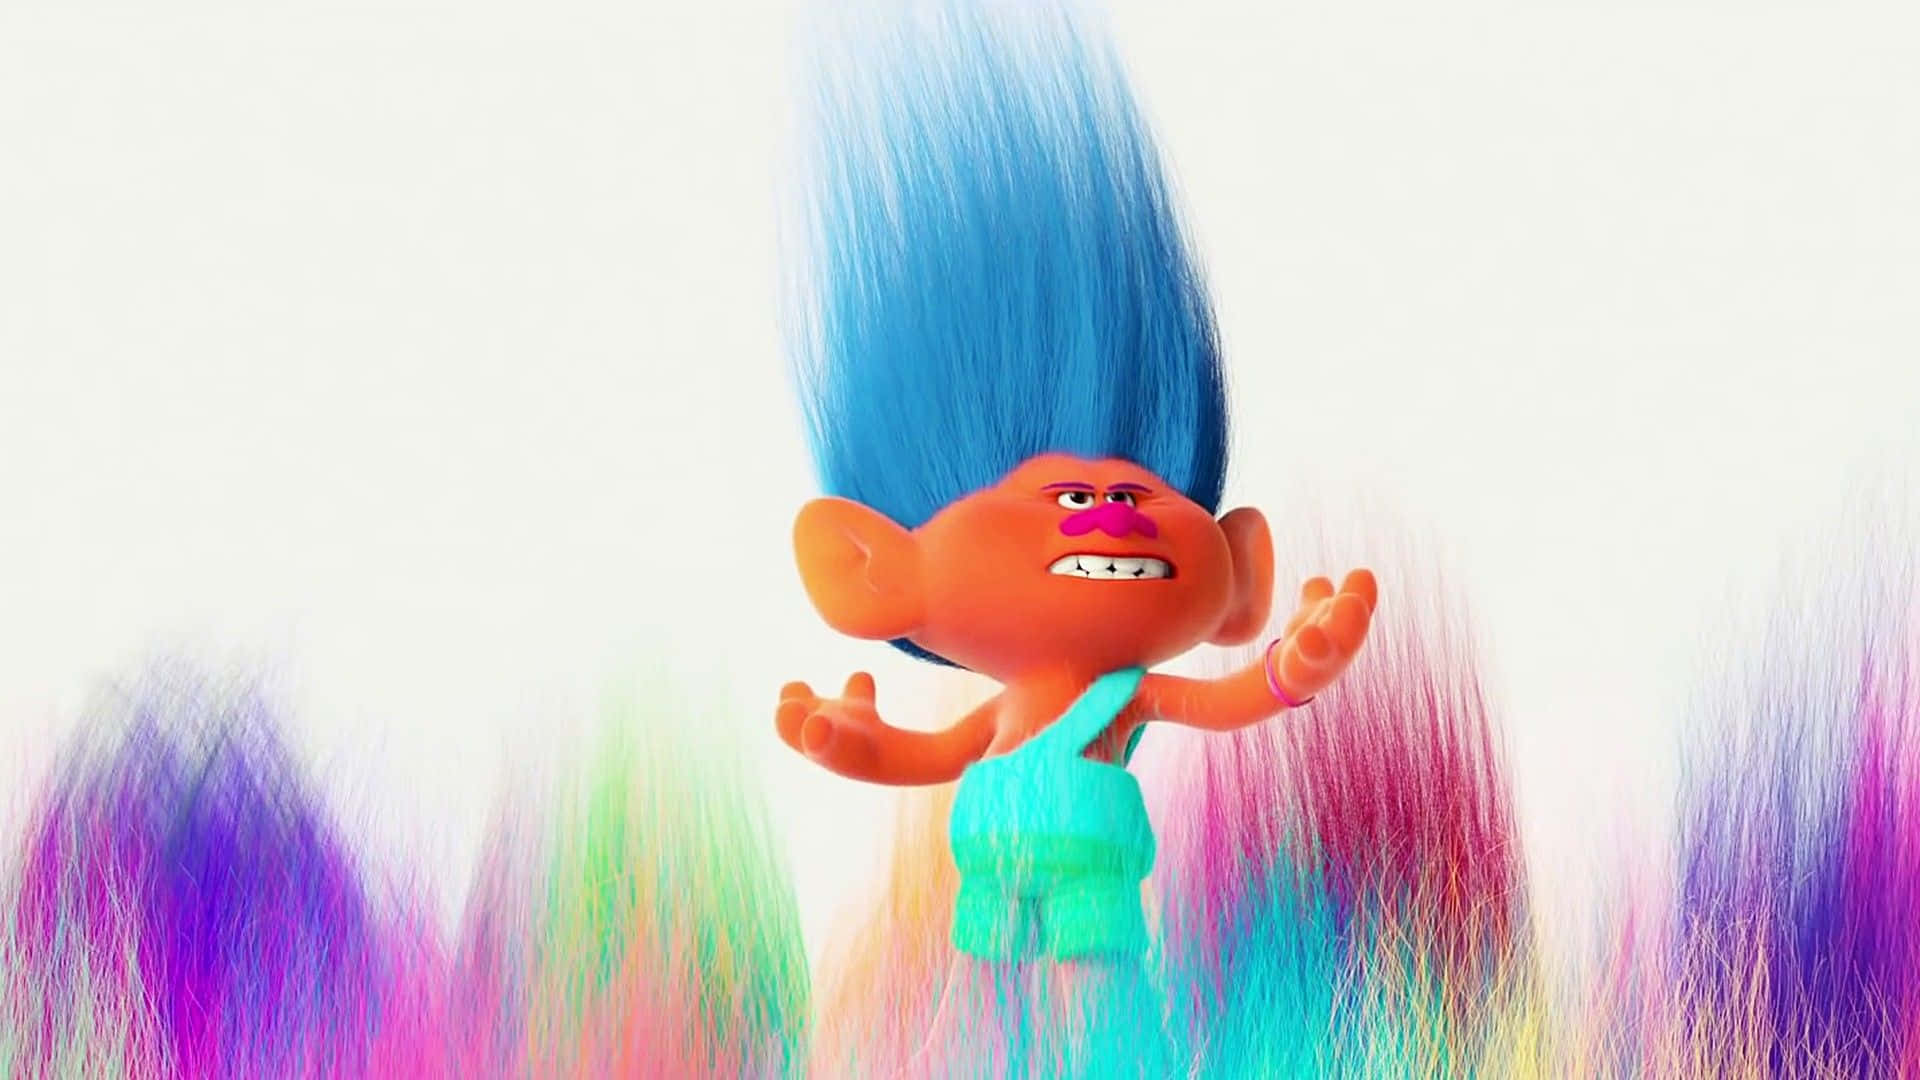 Celebrate the positive vibes with the trolls!